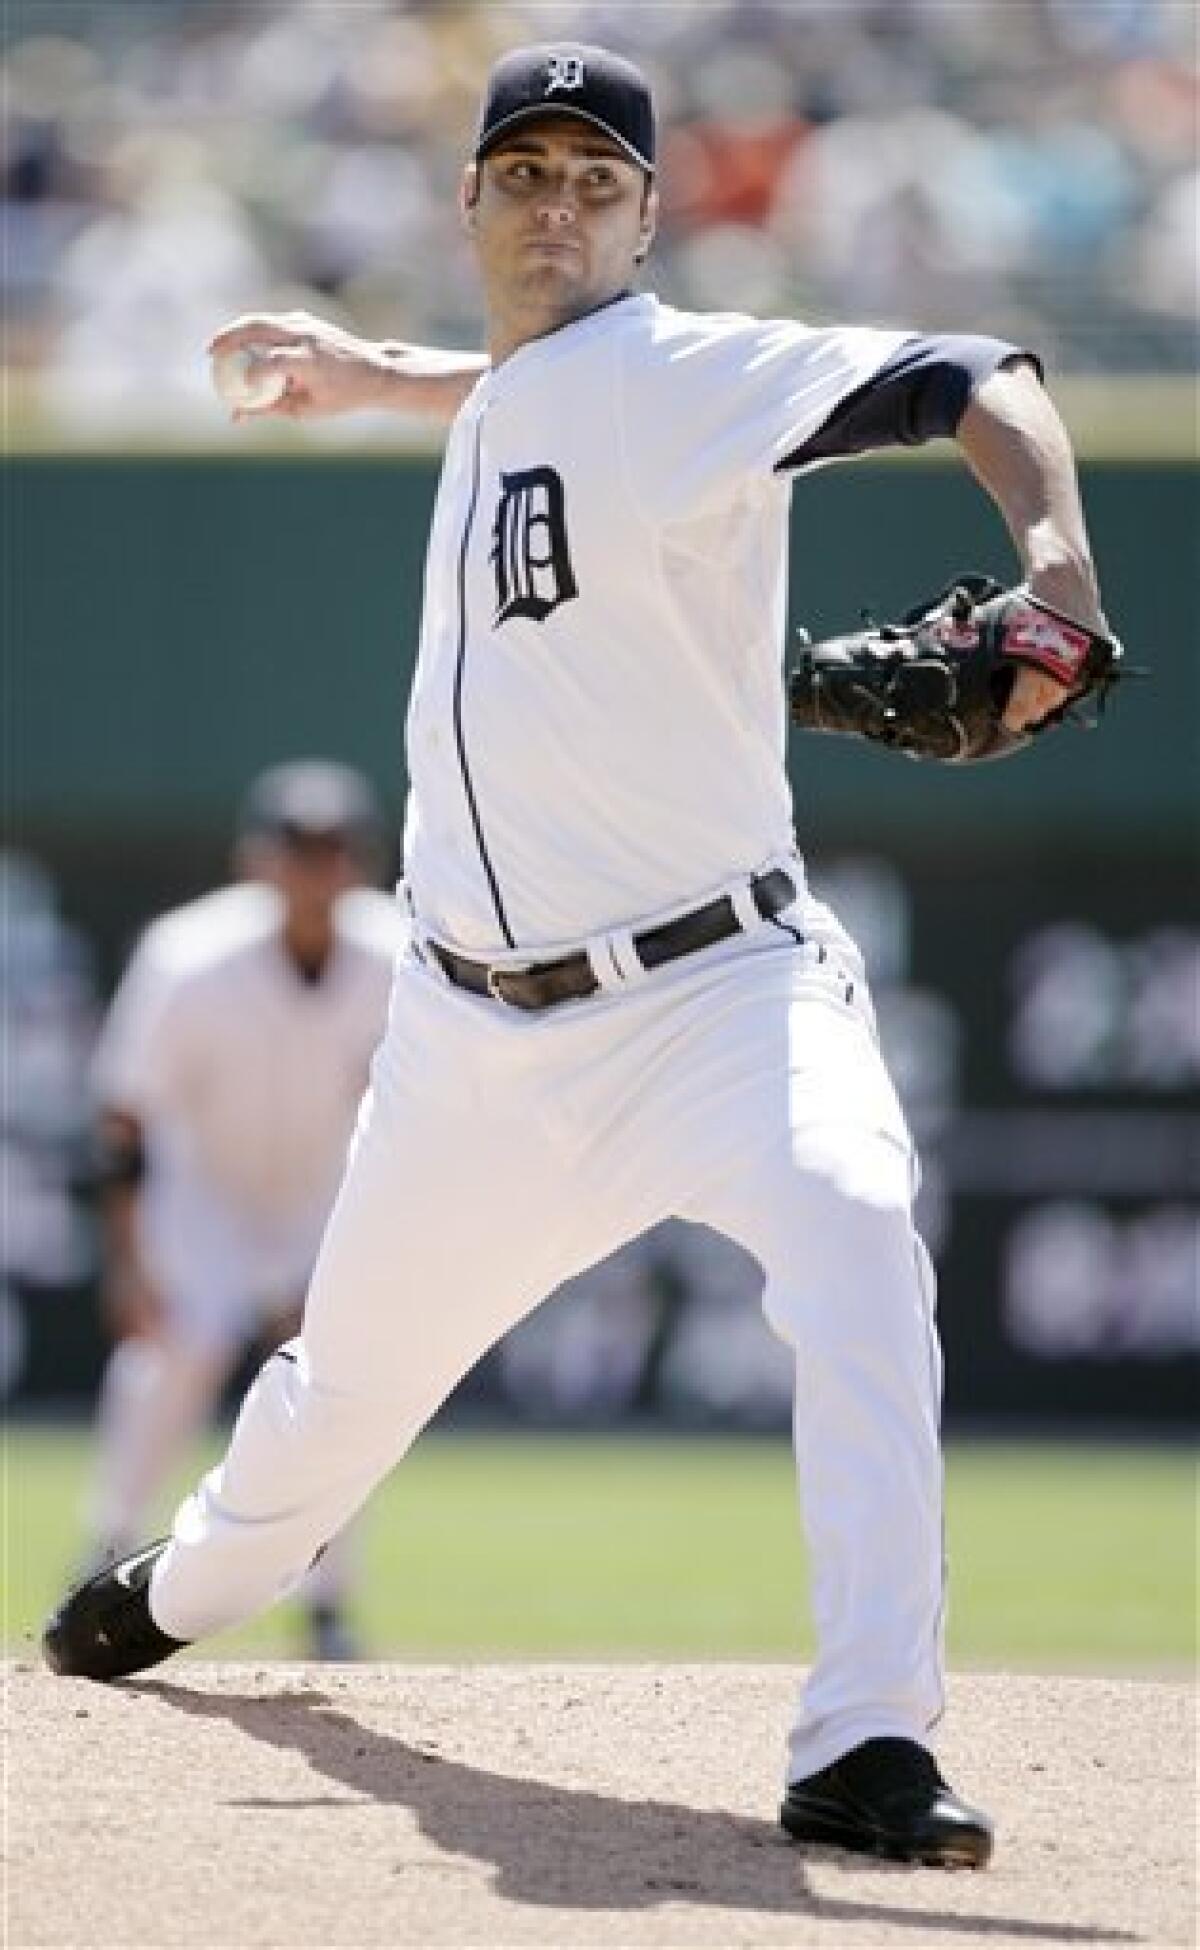 Cabrera gives Tigers win over Royals - The San Diego Union-Tribune